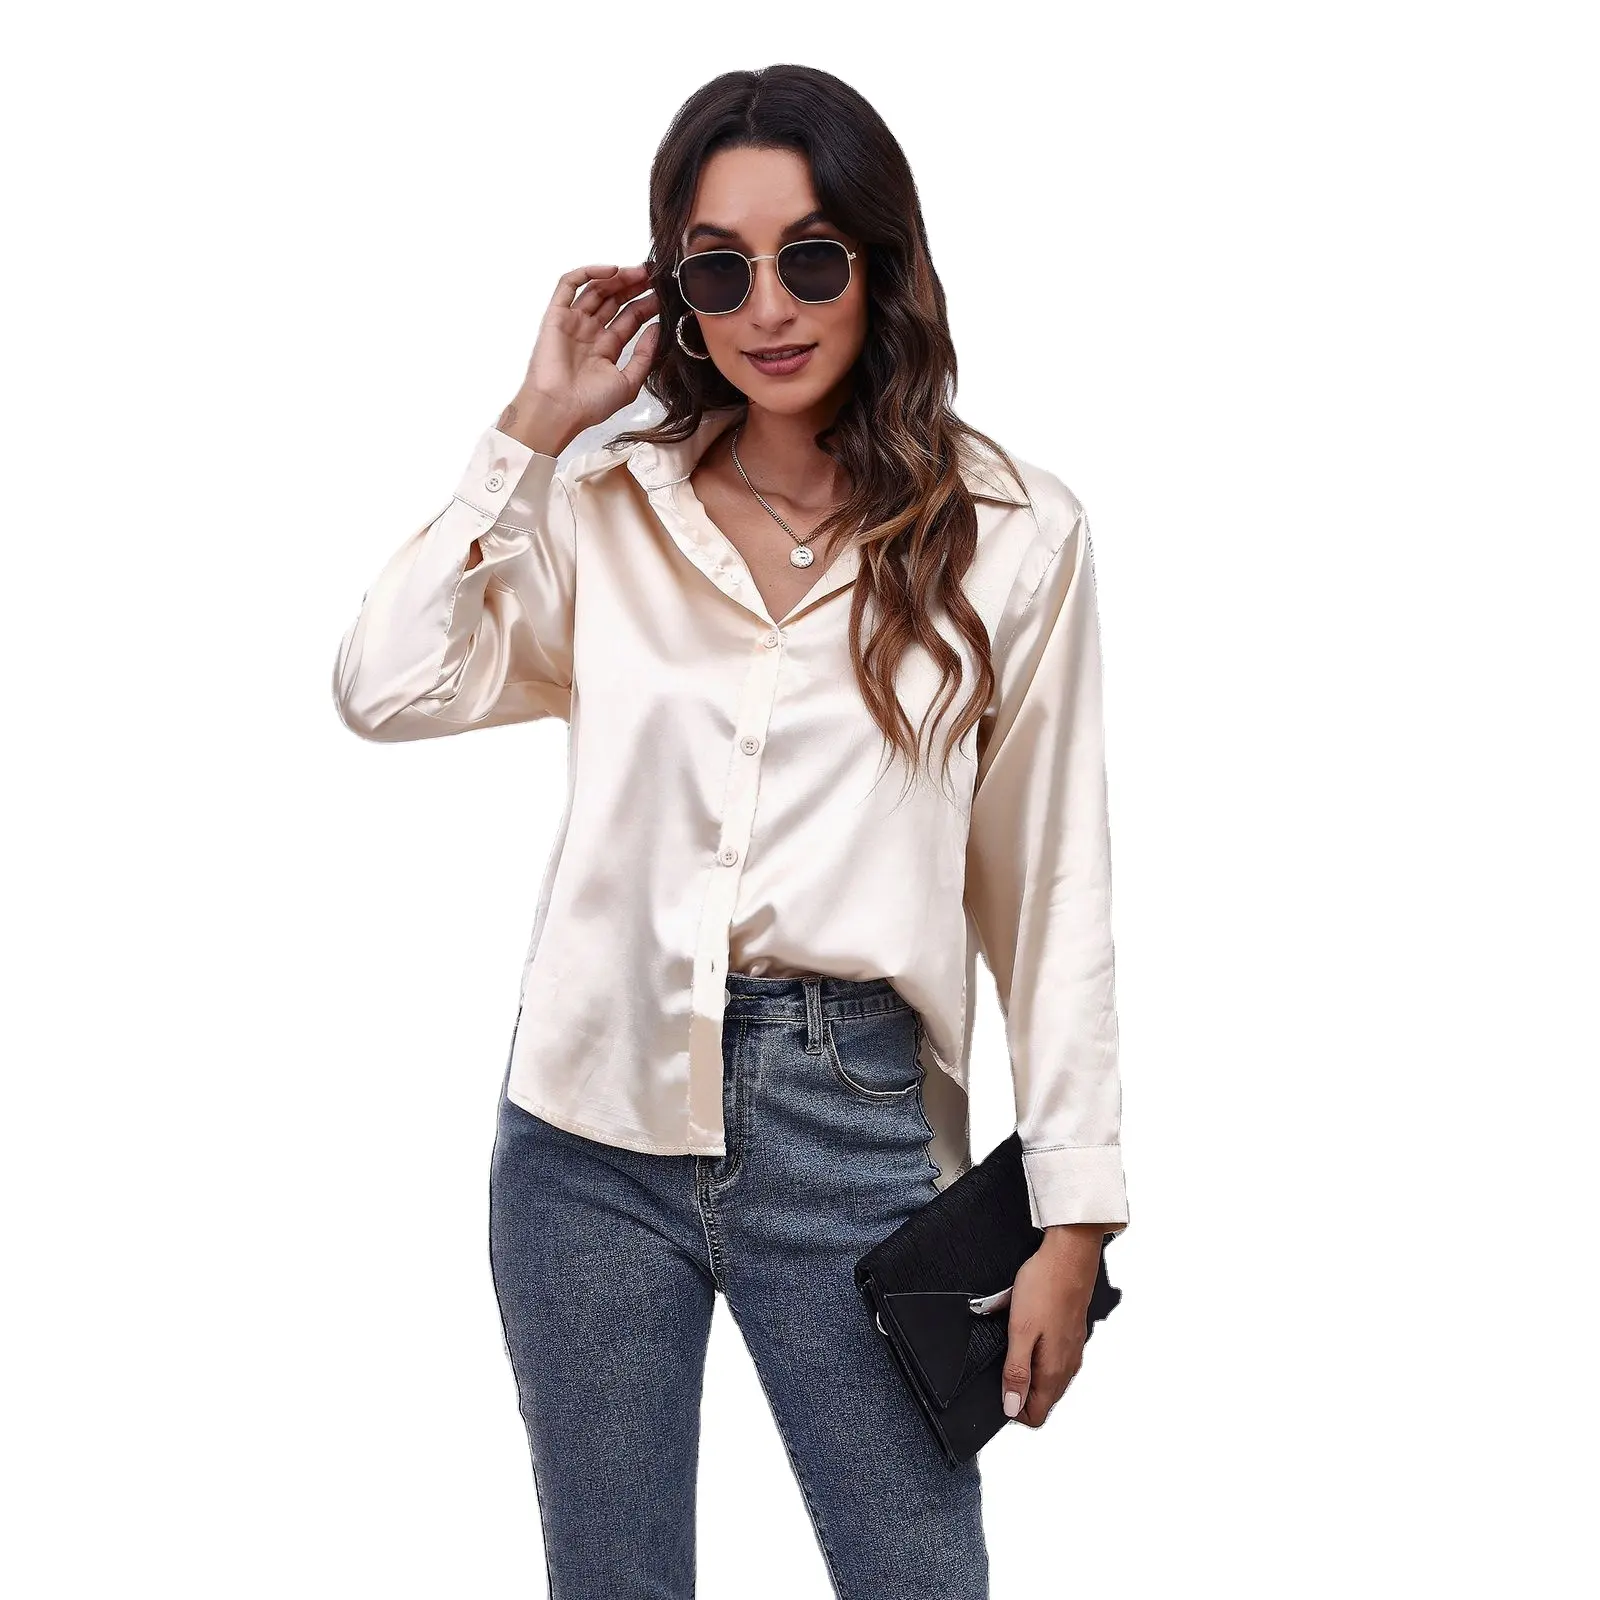 New Arrival Spring Women's Casual Satin Shirt Fashion Long Sleeve Blouses Elegant Button Up Shirt Tops